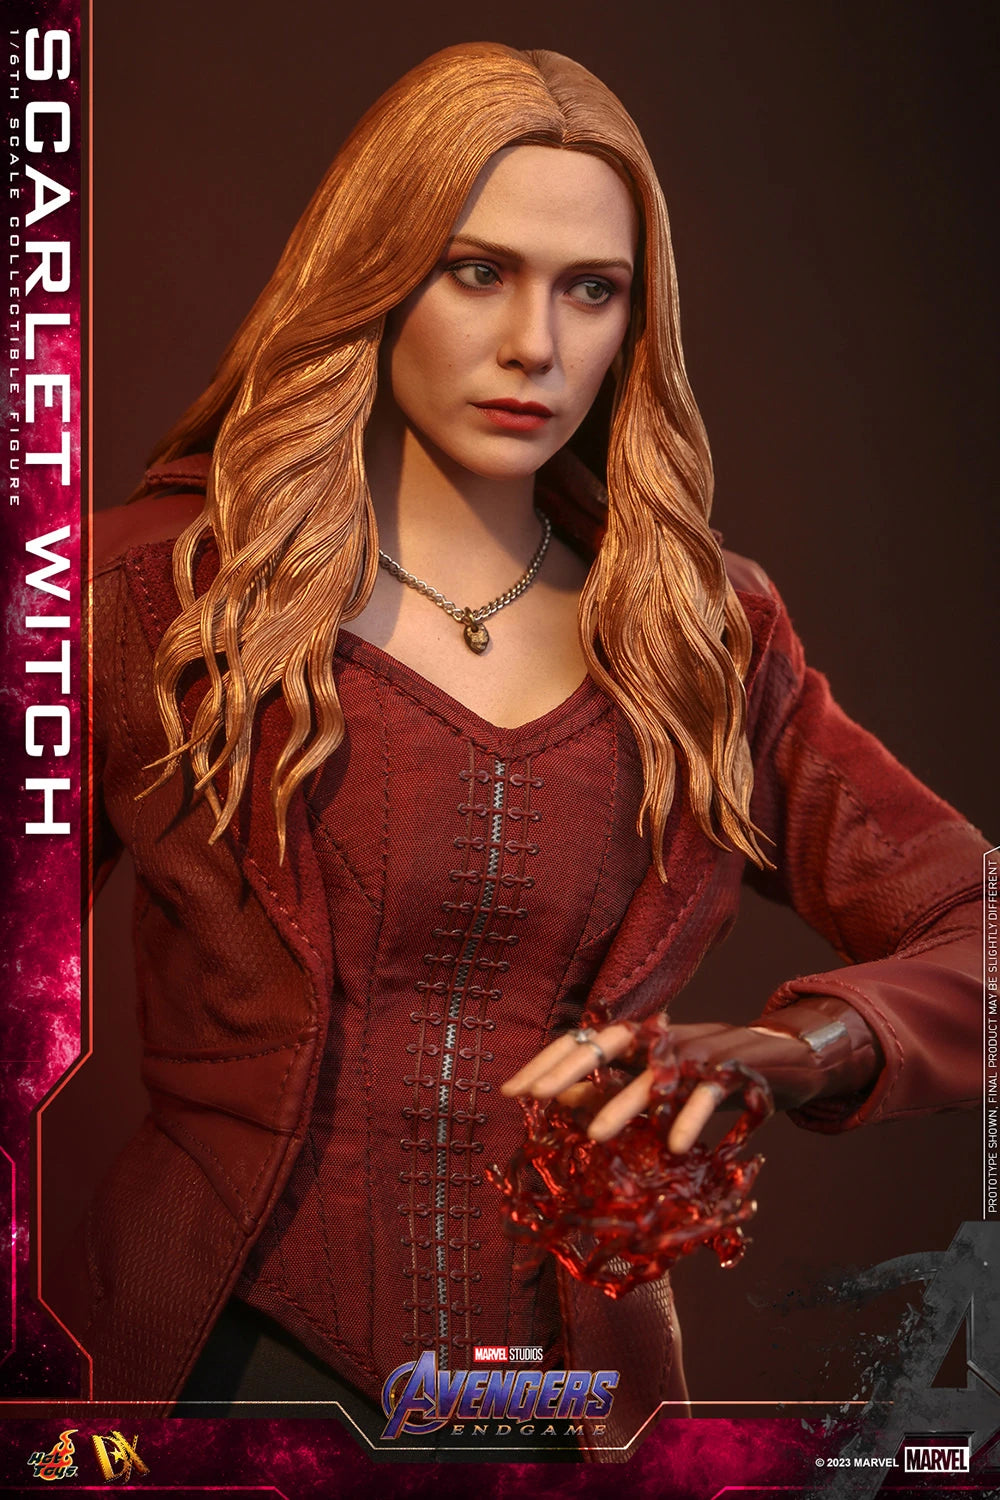 Hot Toys Avengers Endgame Scarlet Witch 1/6th Scale Figure